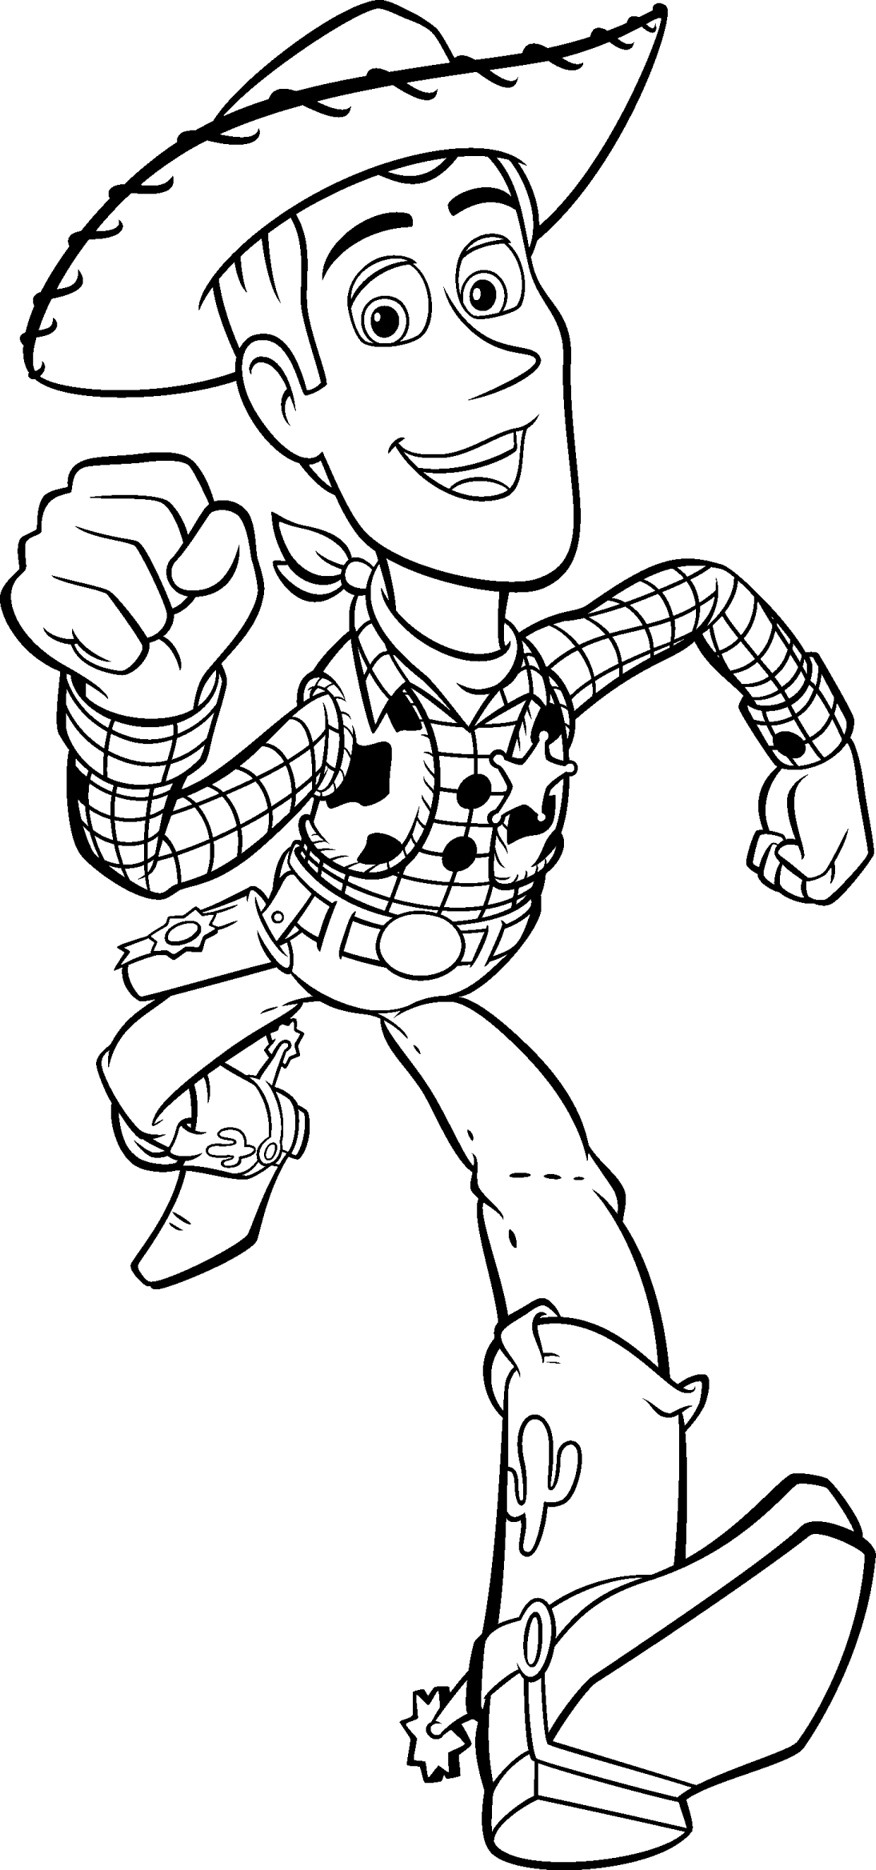 Free Coloring Pages Pdf
 Coloring Pages Disney Printables Coloring Pages Designs